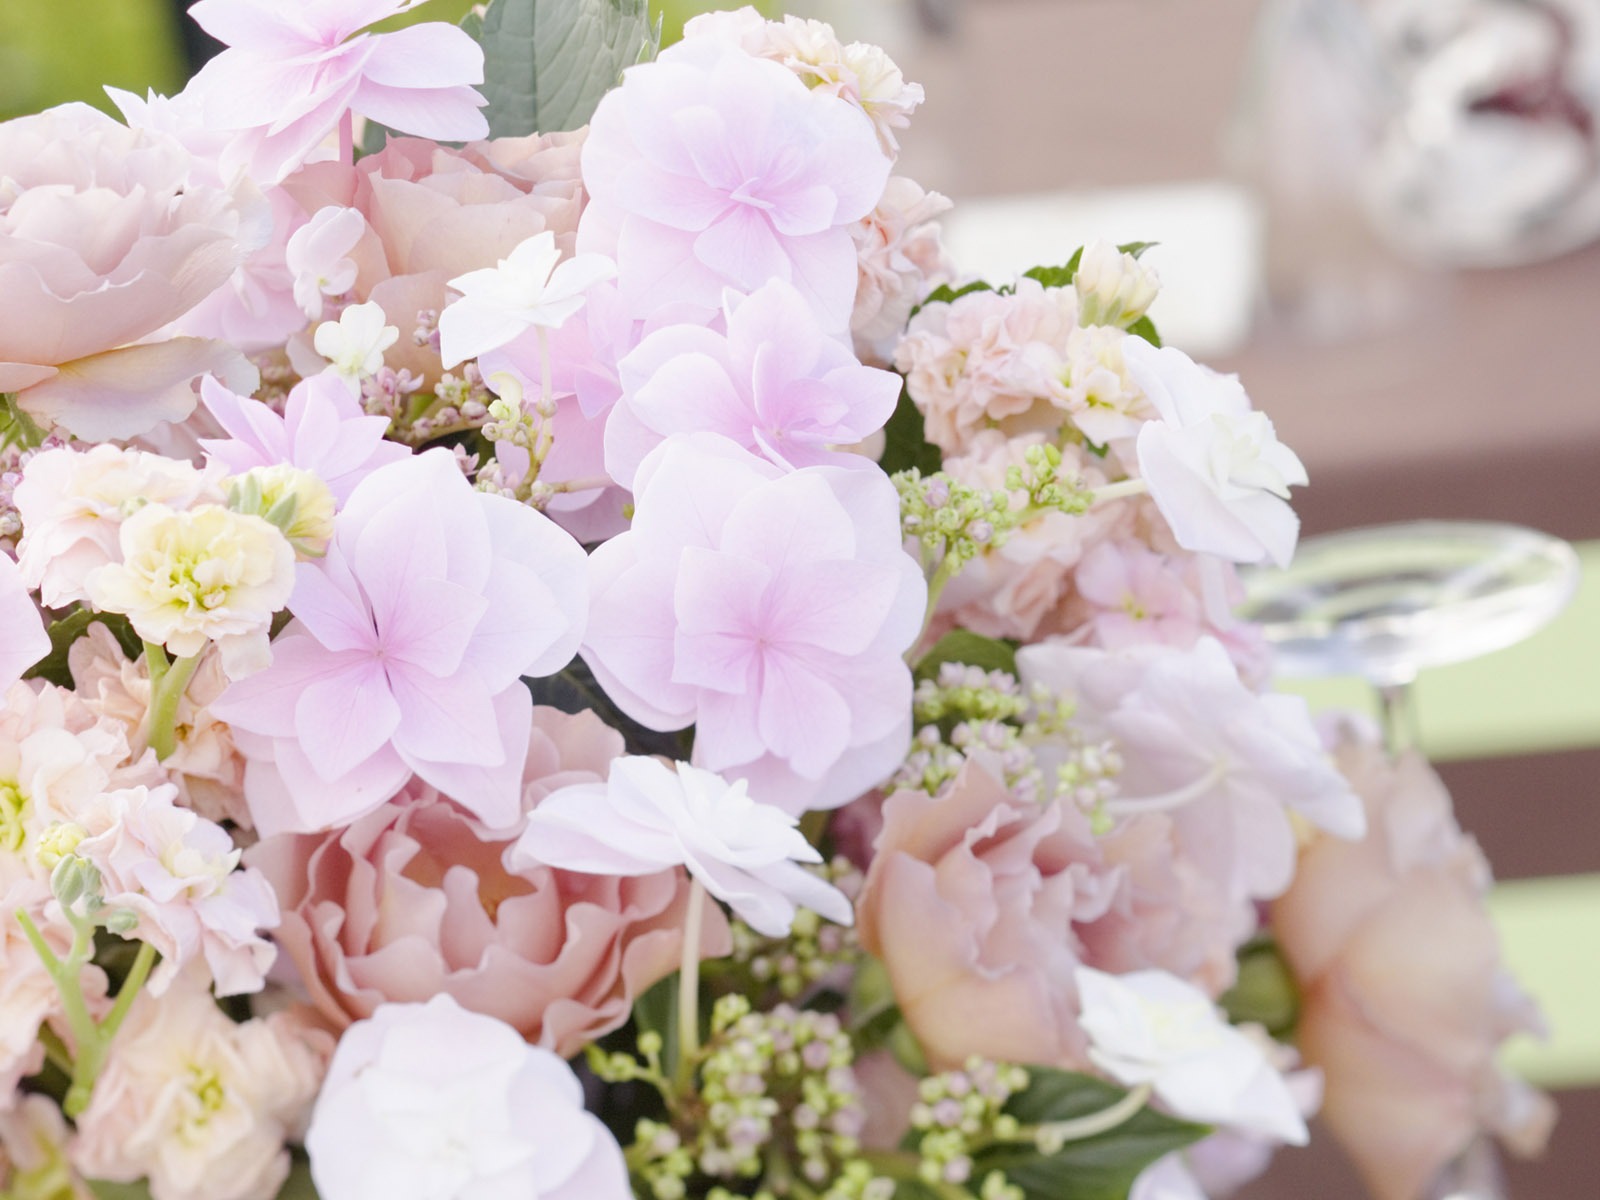 Weddings and Flowers wallpaper (2) #4 - 1600x1200